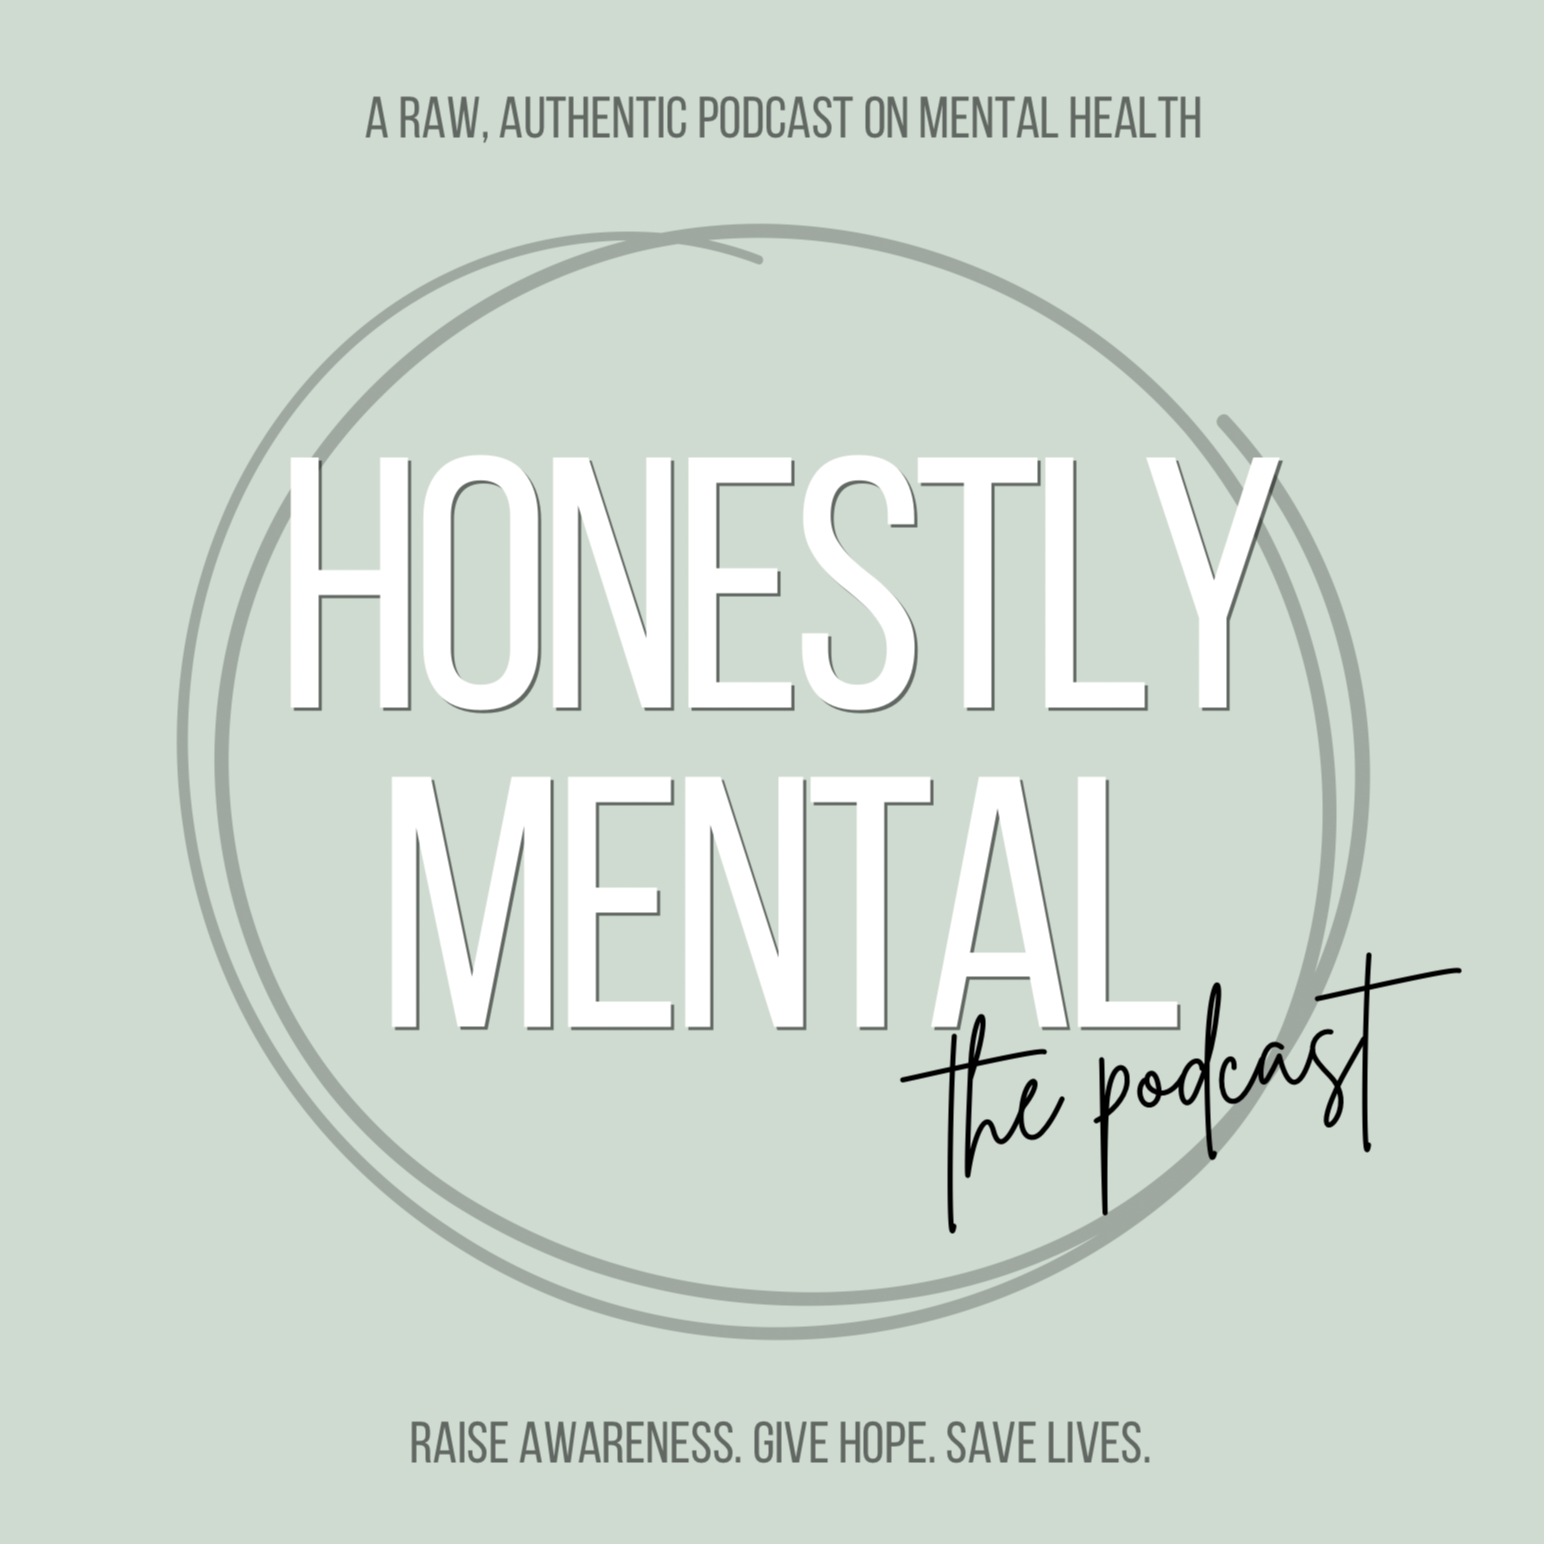 Honestly Mental, the podcast